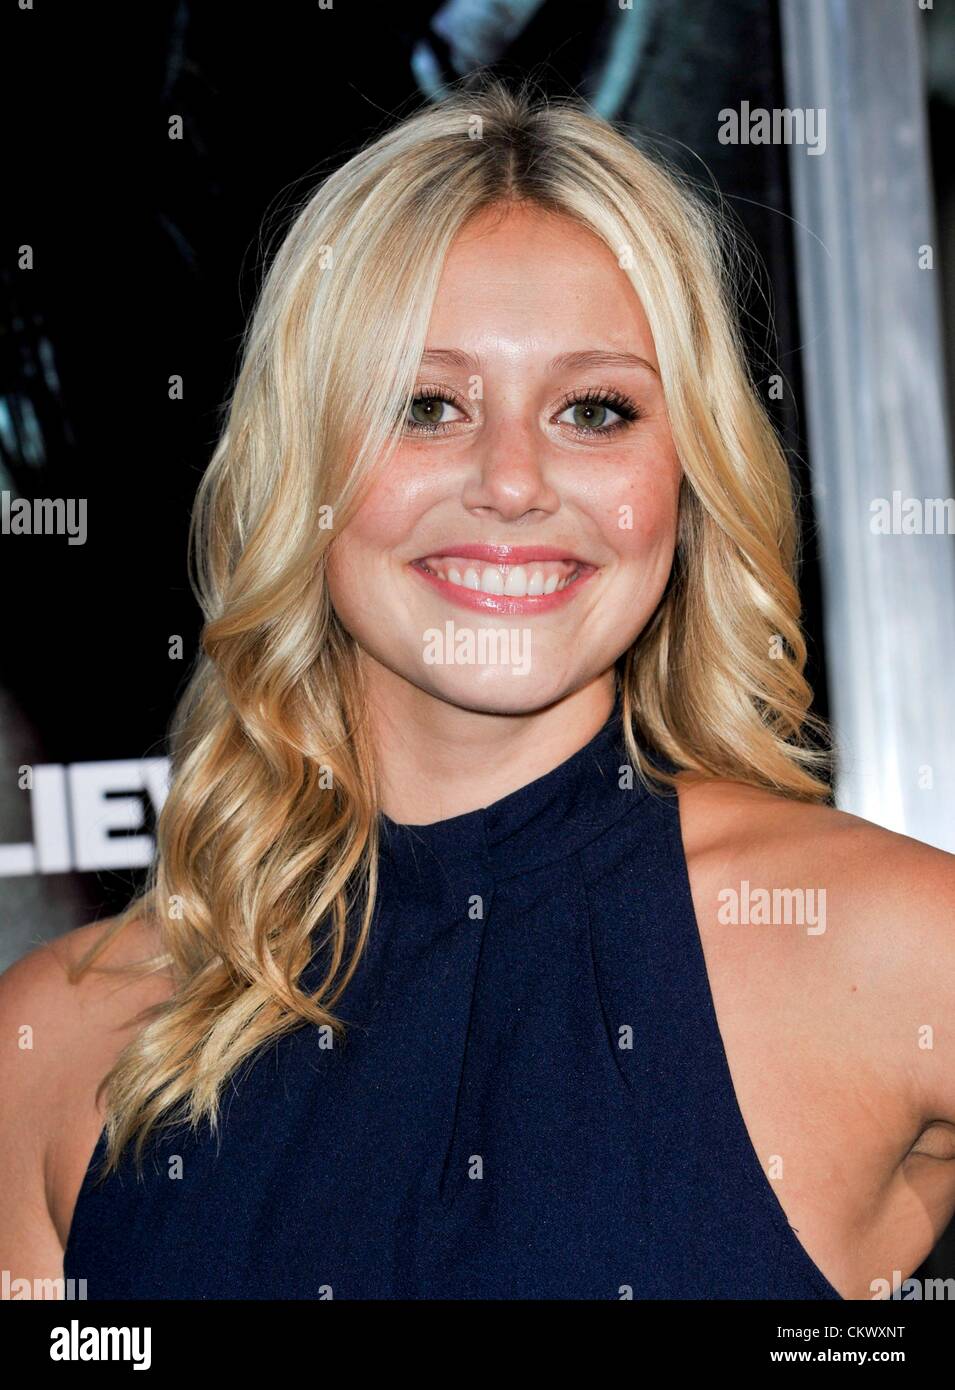 USA. Julianna Guill at arrivals for THE APPARITION Premiere, Grauman's Chinese Theatre, Los Angeles, CA August 23, 2012. Photo By: Elizabeth Goodenough/Everett Collection Stock Photo